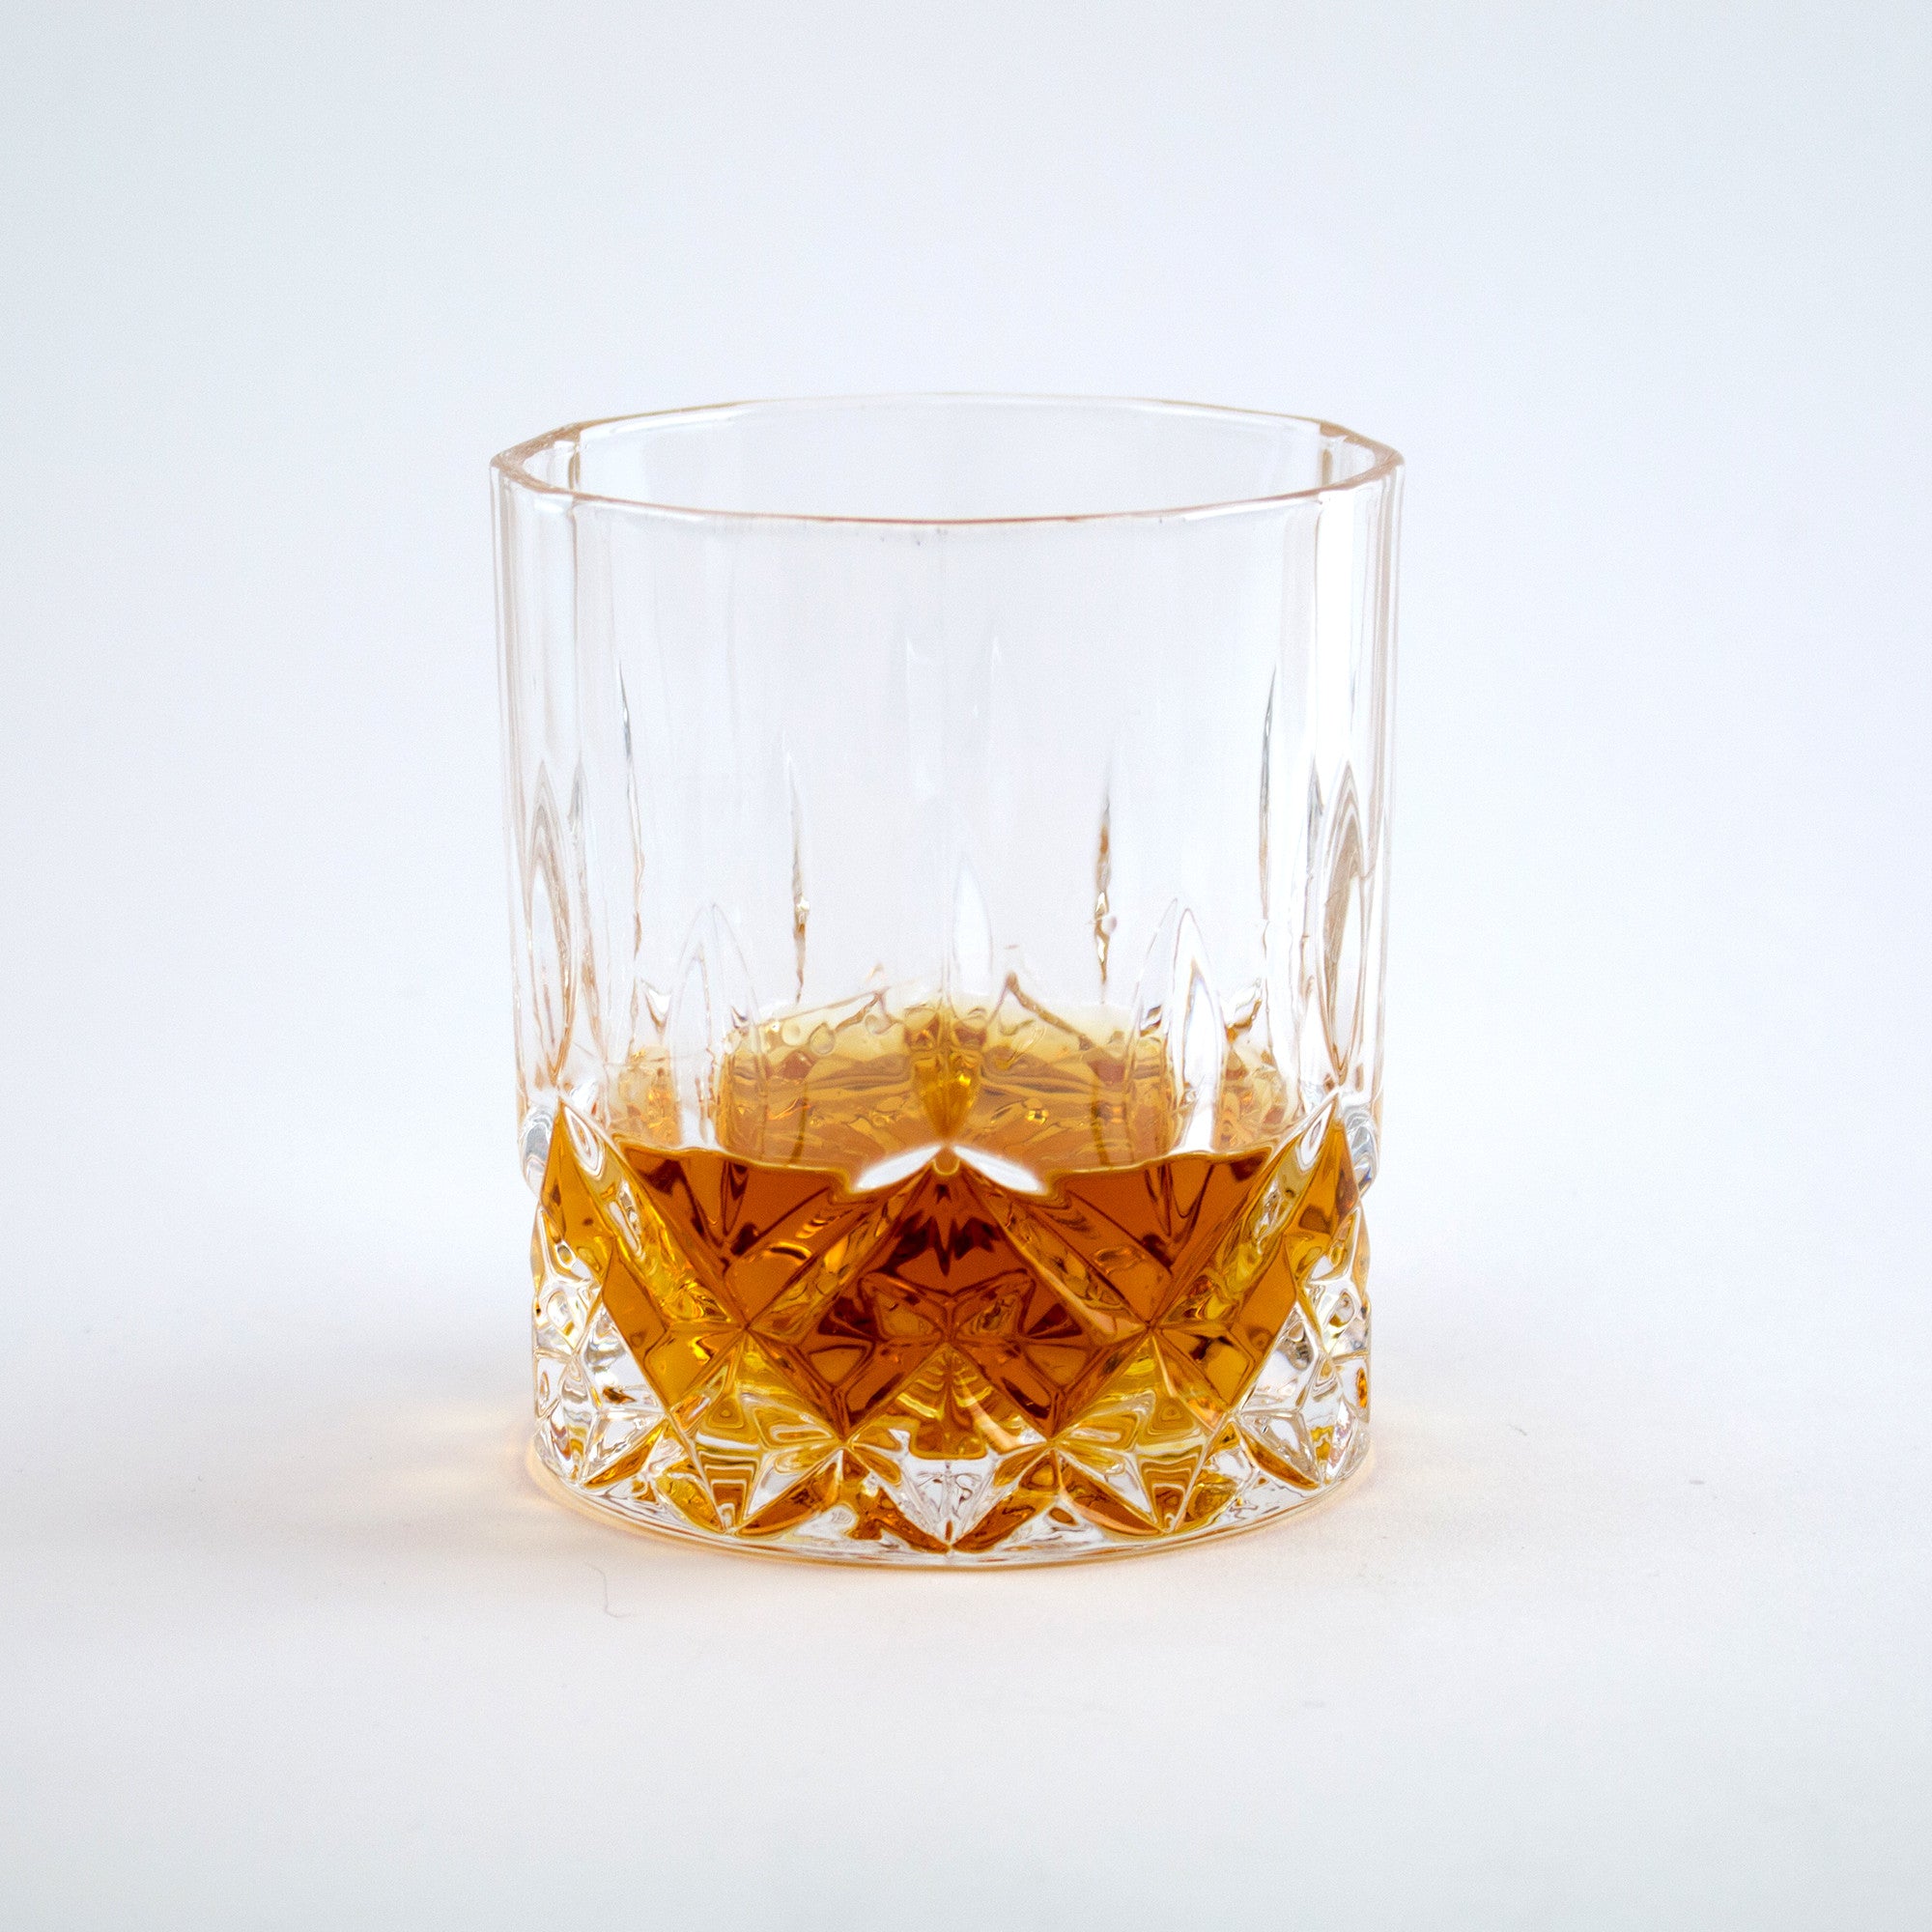 Cooler than Cool Chilled Smoked Whiskey Glass (Set of 2) - The VinePair  Store